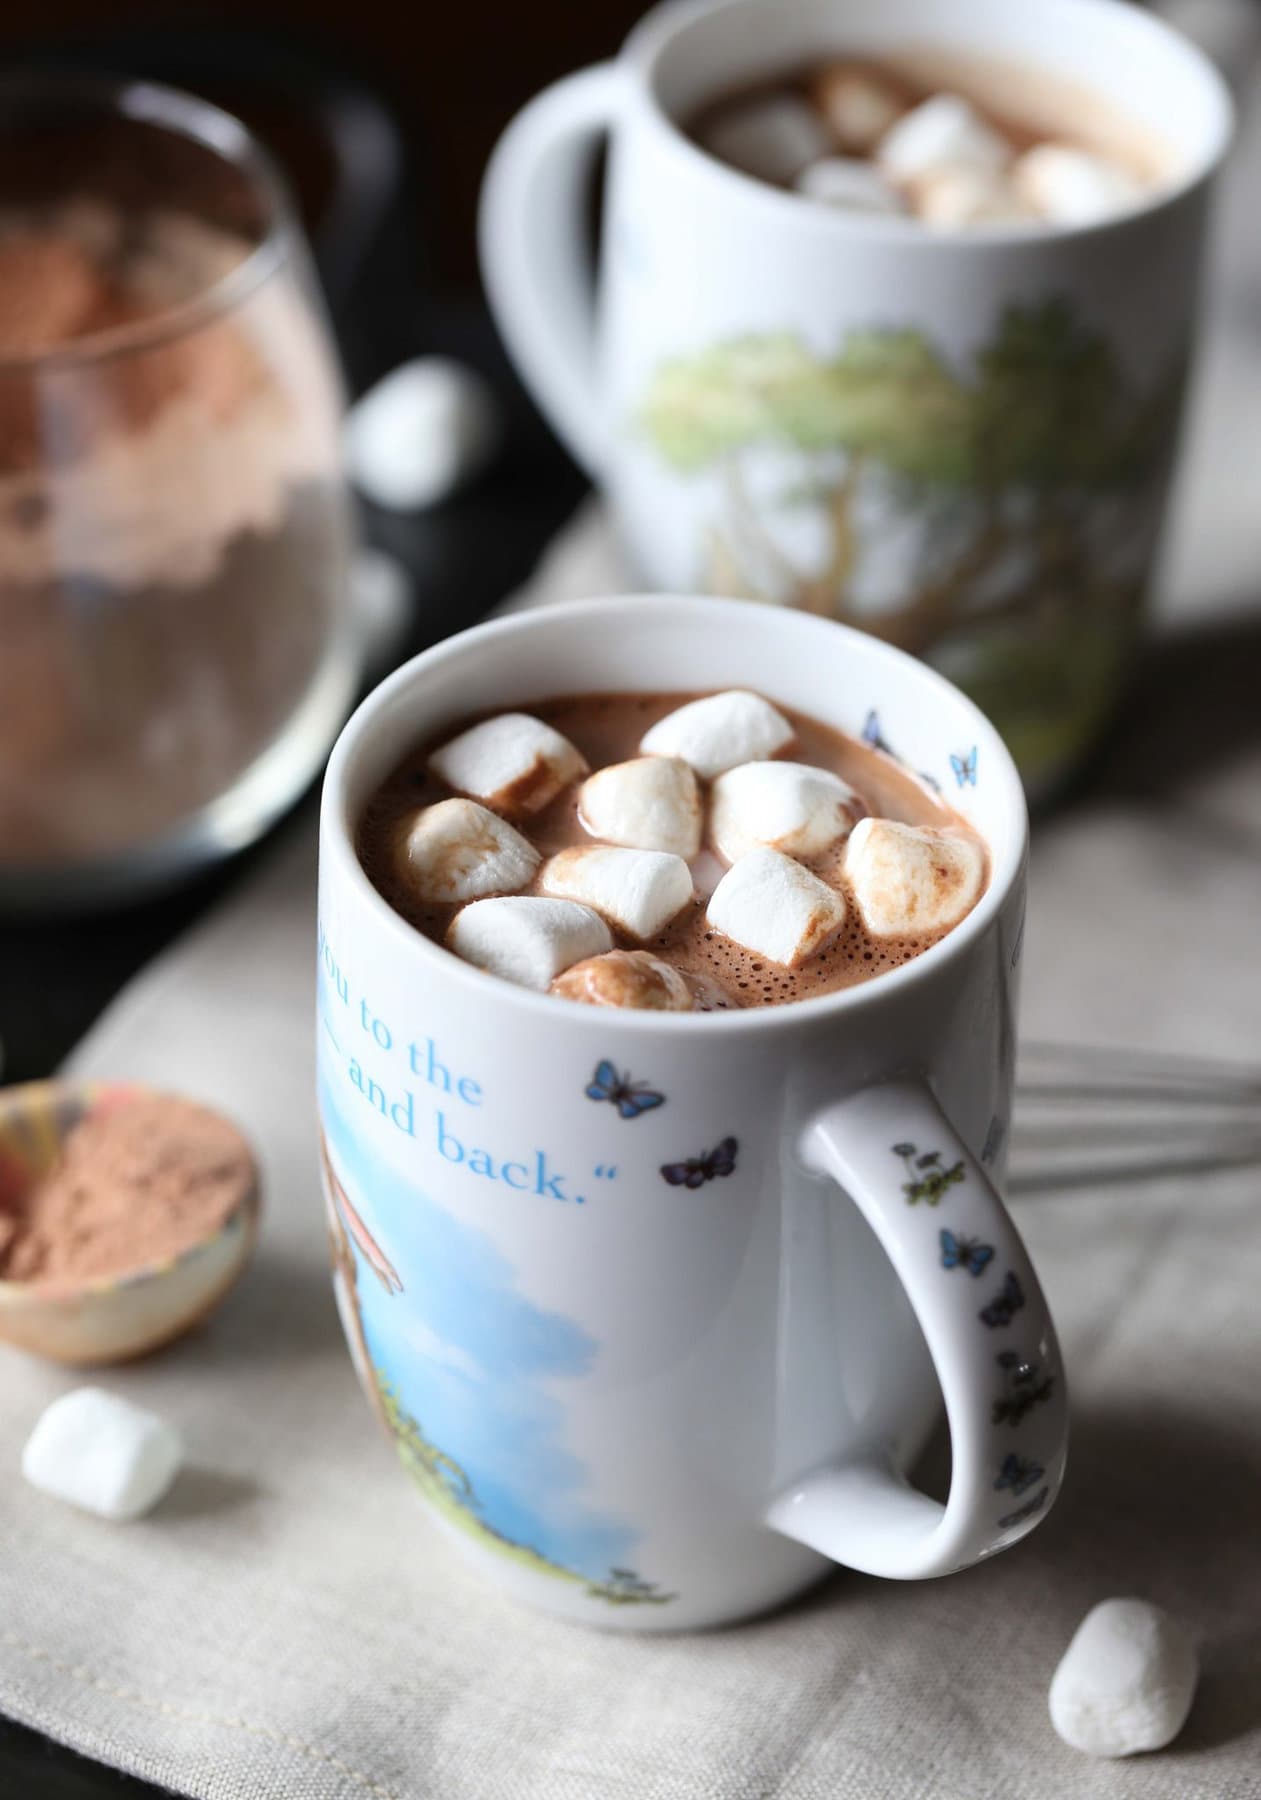 A mug of homemade hot cocoa topped with mini marshmallows, next to a jar of hot chocolate mix and a second mug of hot cocoa in the background.